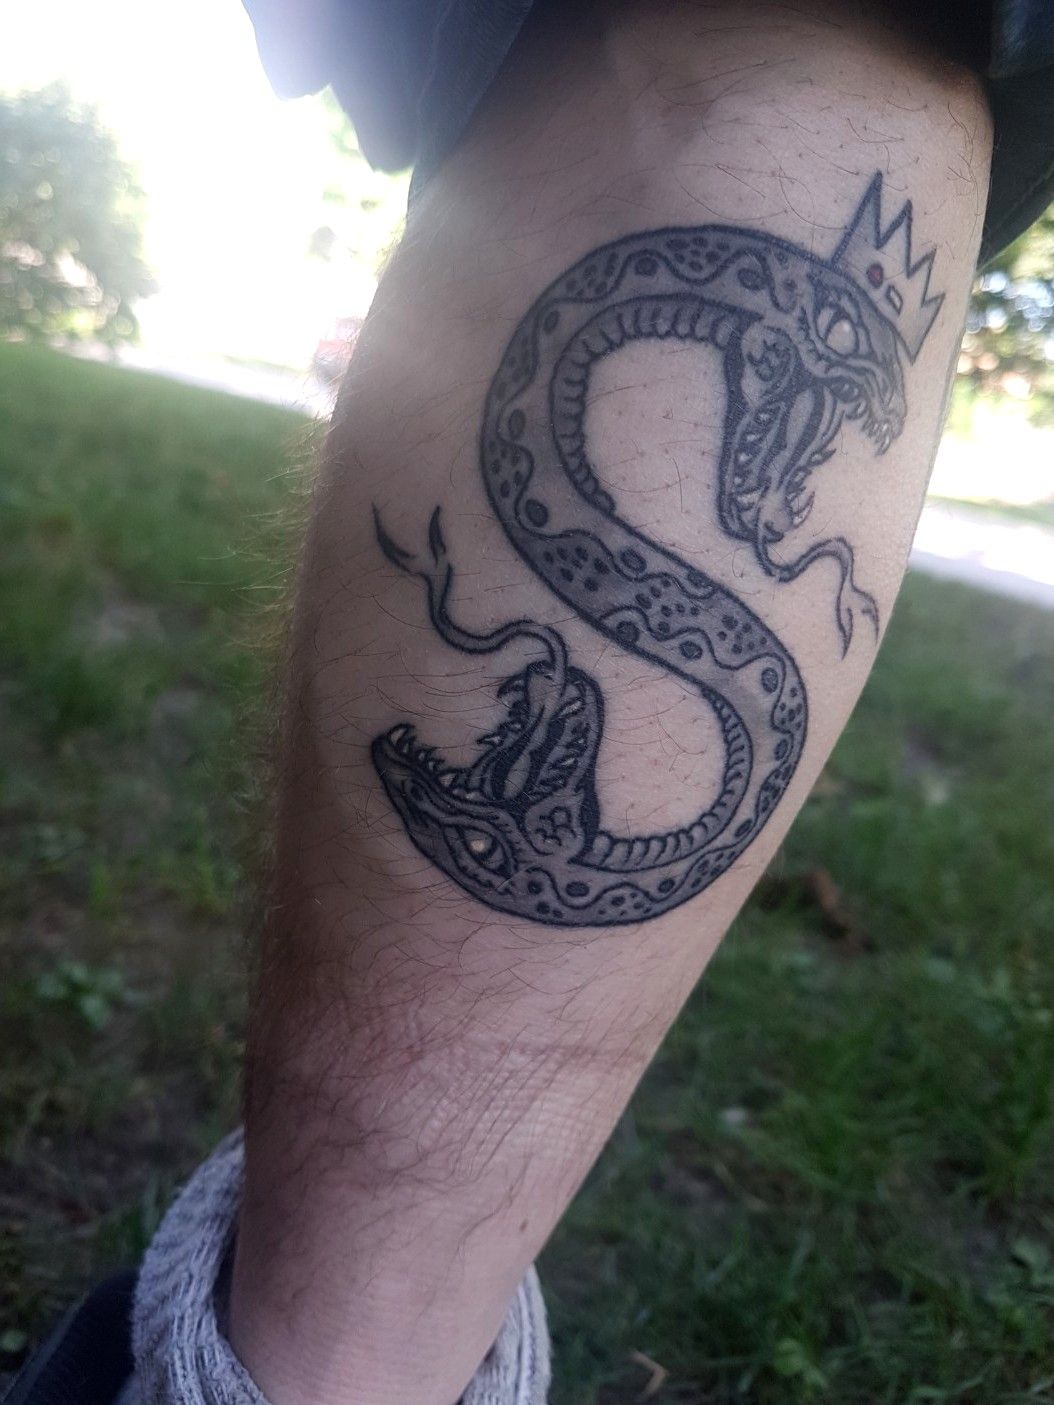 Riverdale Southside Serpents Tattoo on my arm  Serpent tattoo Tattoos  Riverdale